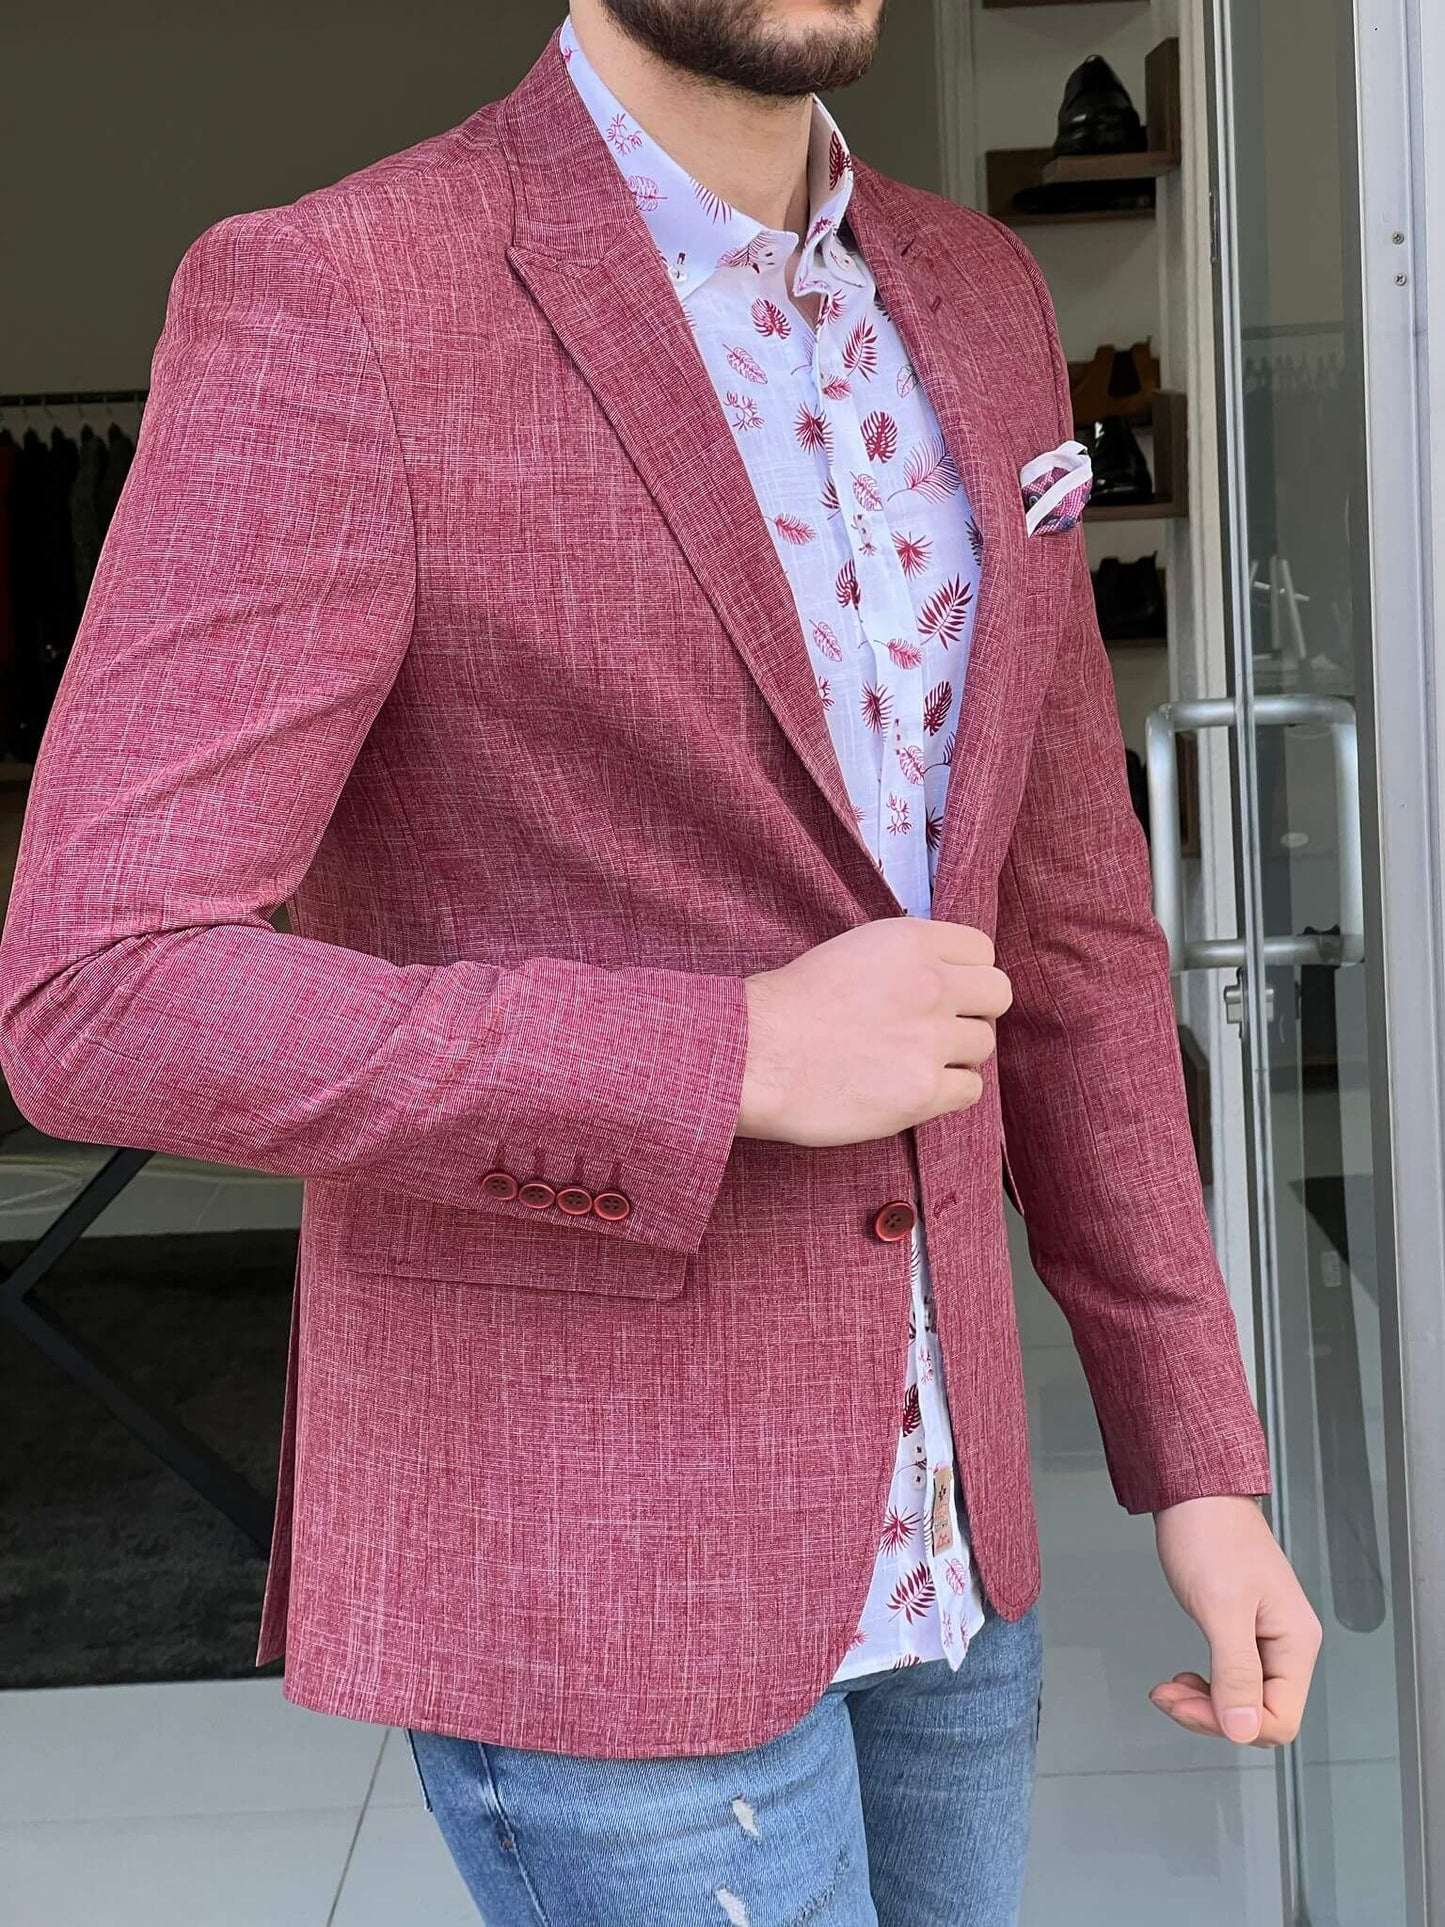 Perfectly tailored Kansas Red Cotton Blazer for any occasion